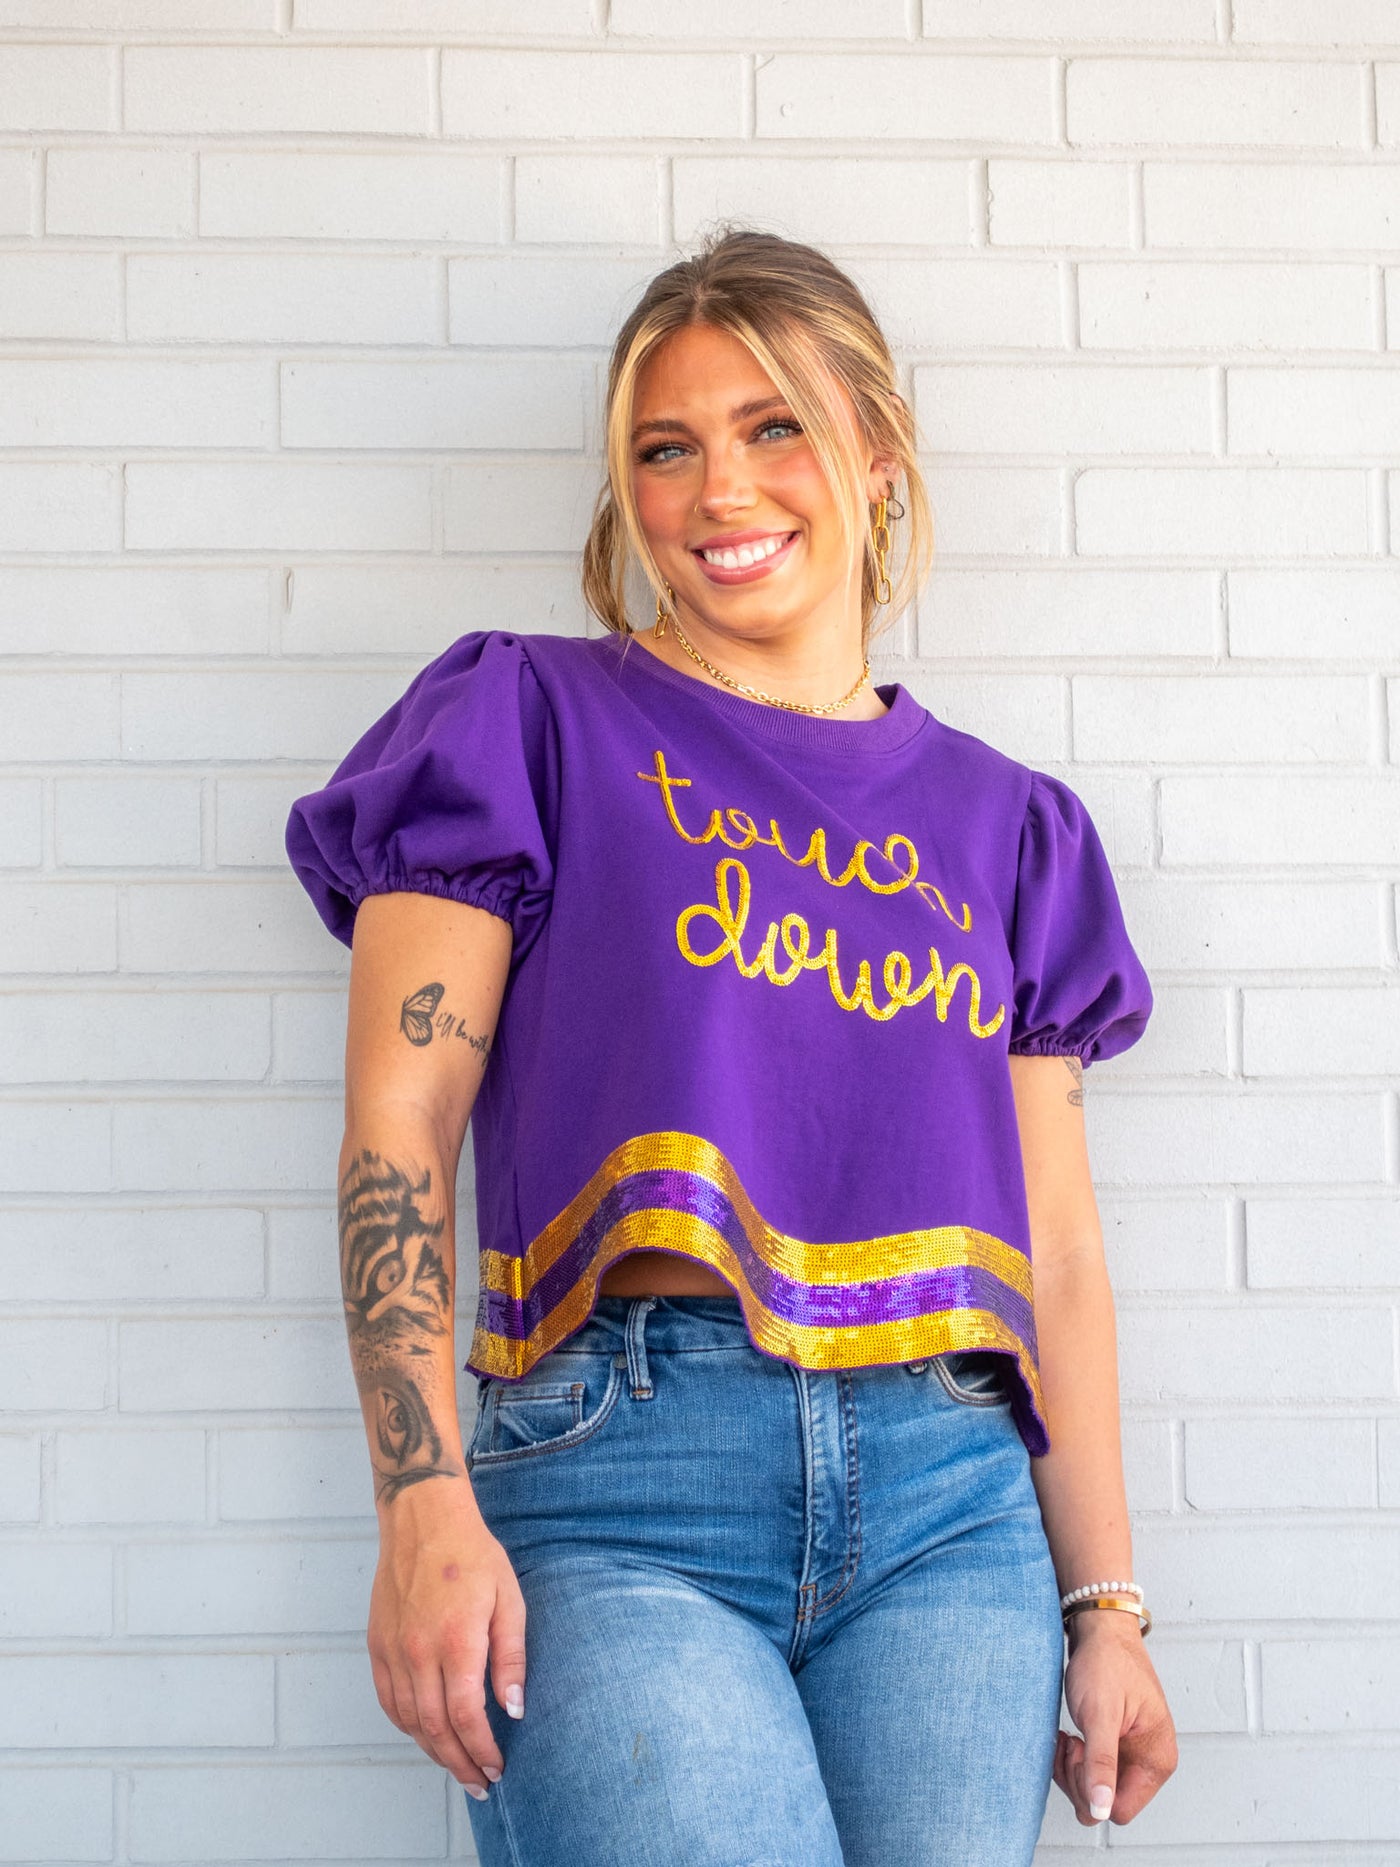 A model wearing a purple tee with a gold and purple sequin wavy hem and the phrase "touch down" on it. She has it paired with a pair of light wash jeans.